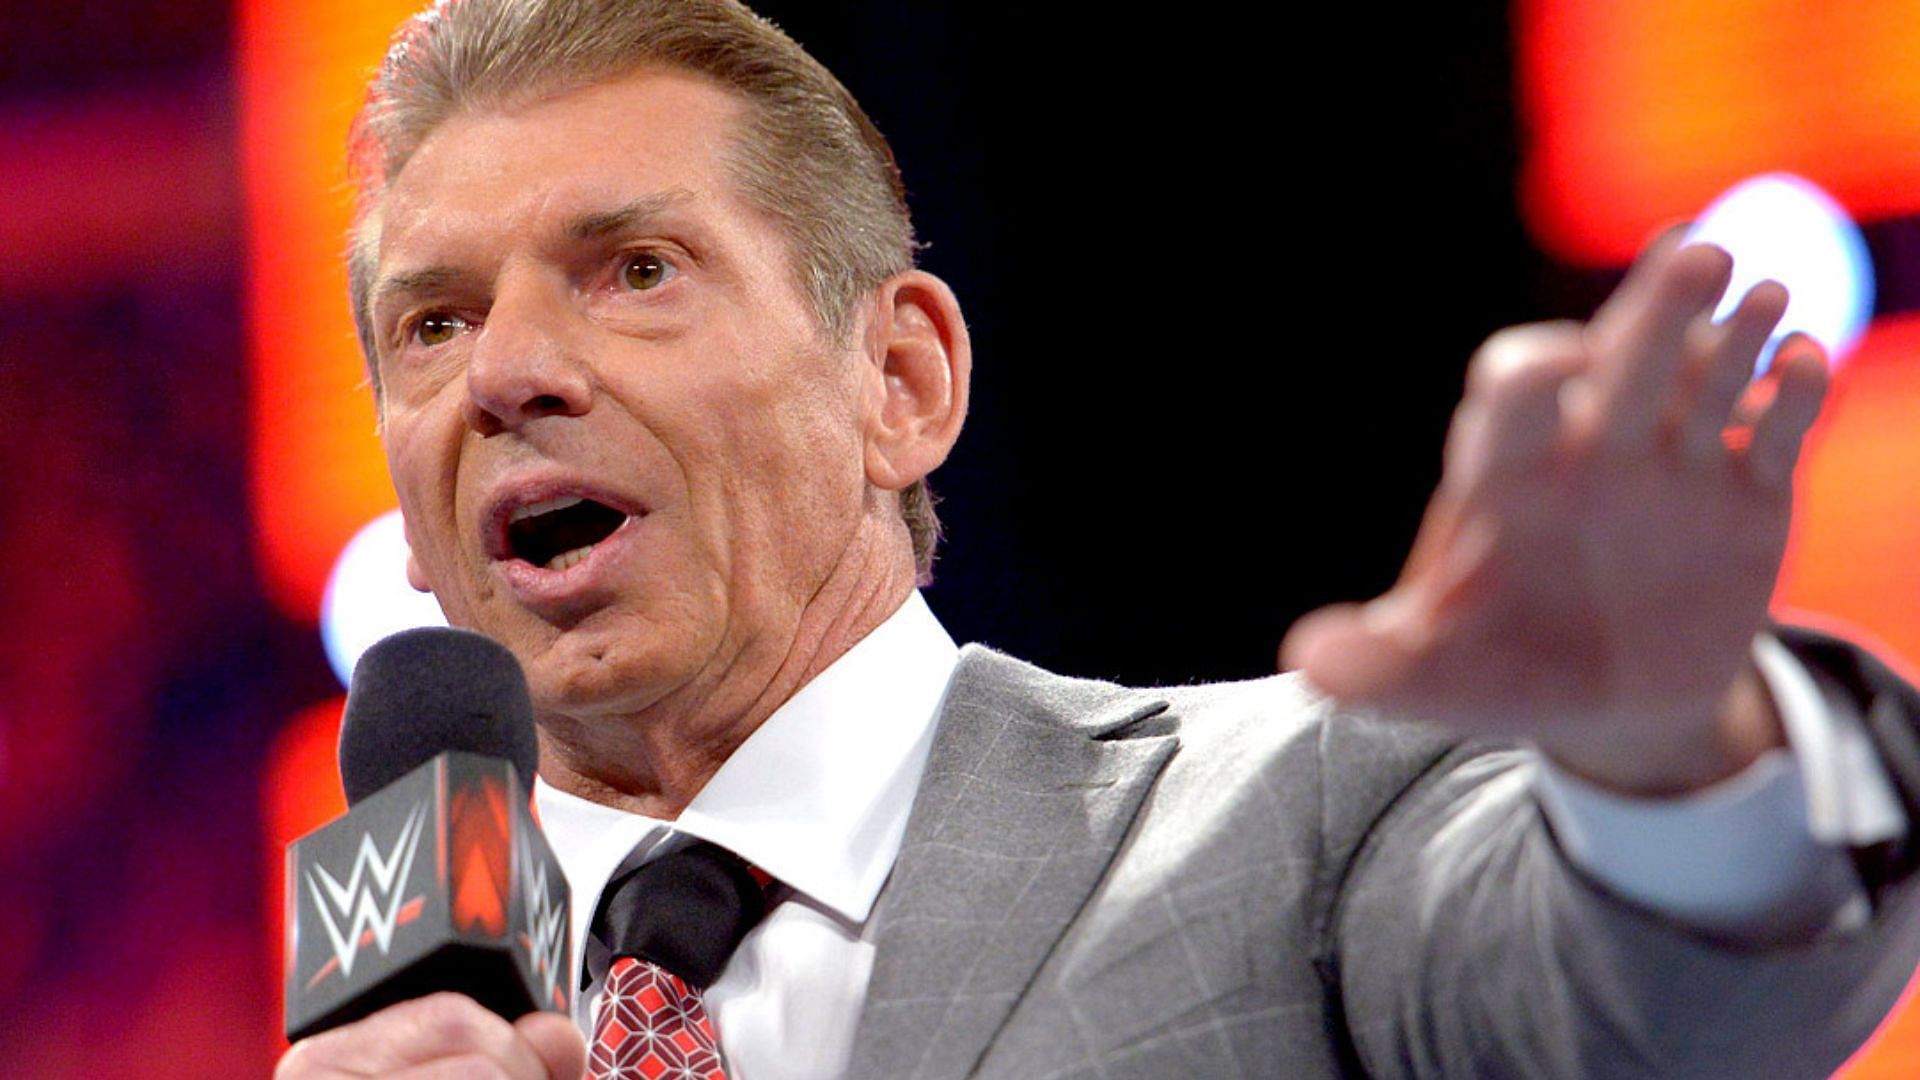 Vince McMahon returned to WWE as Executive Chairman of the Board